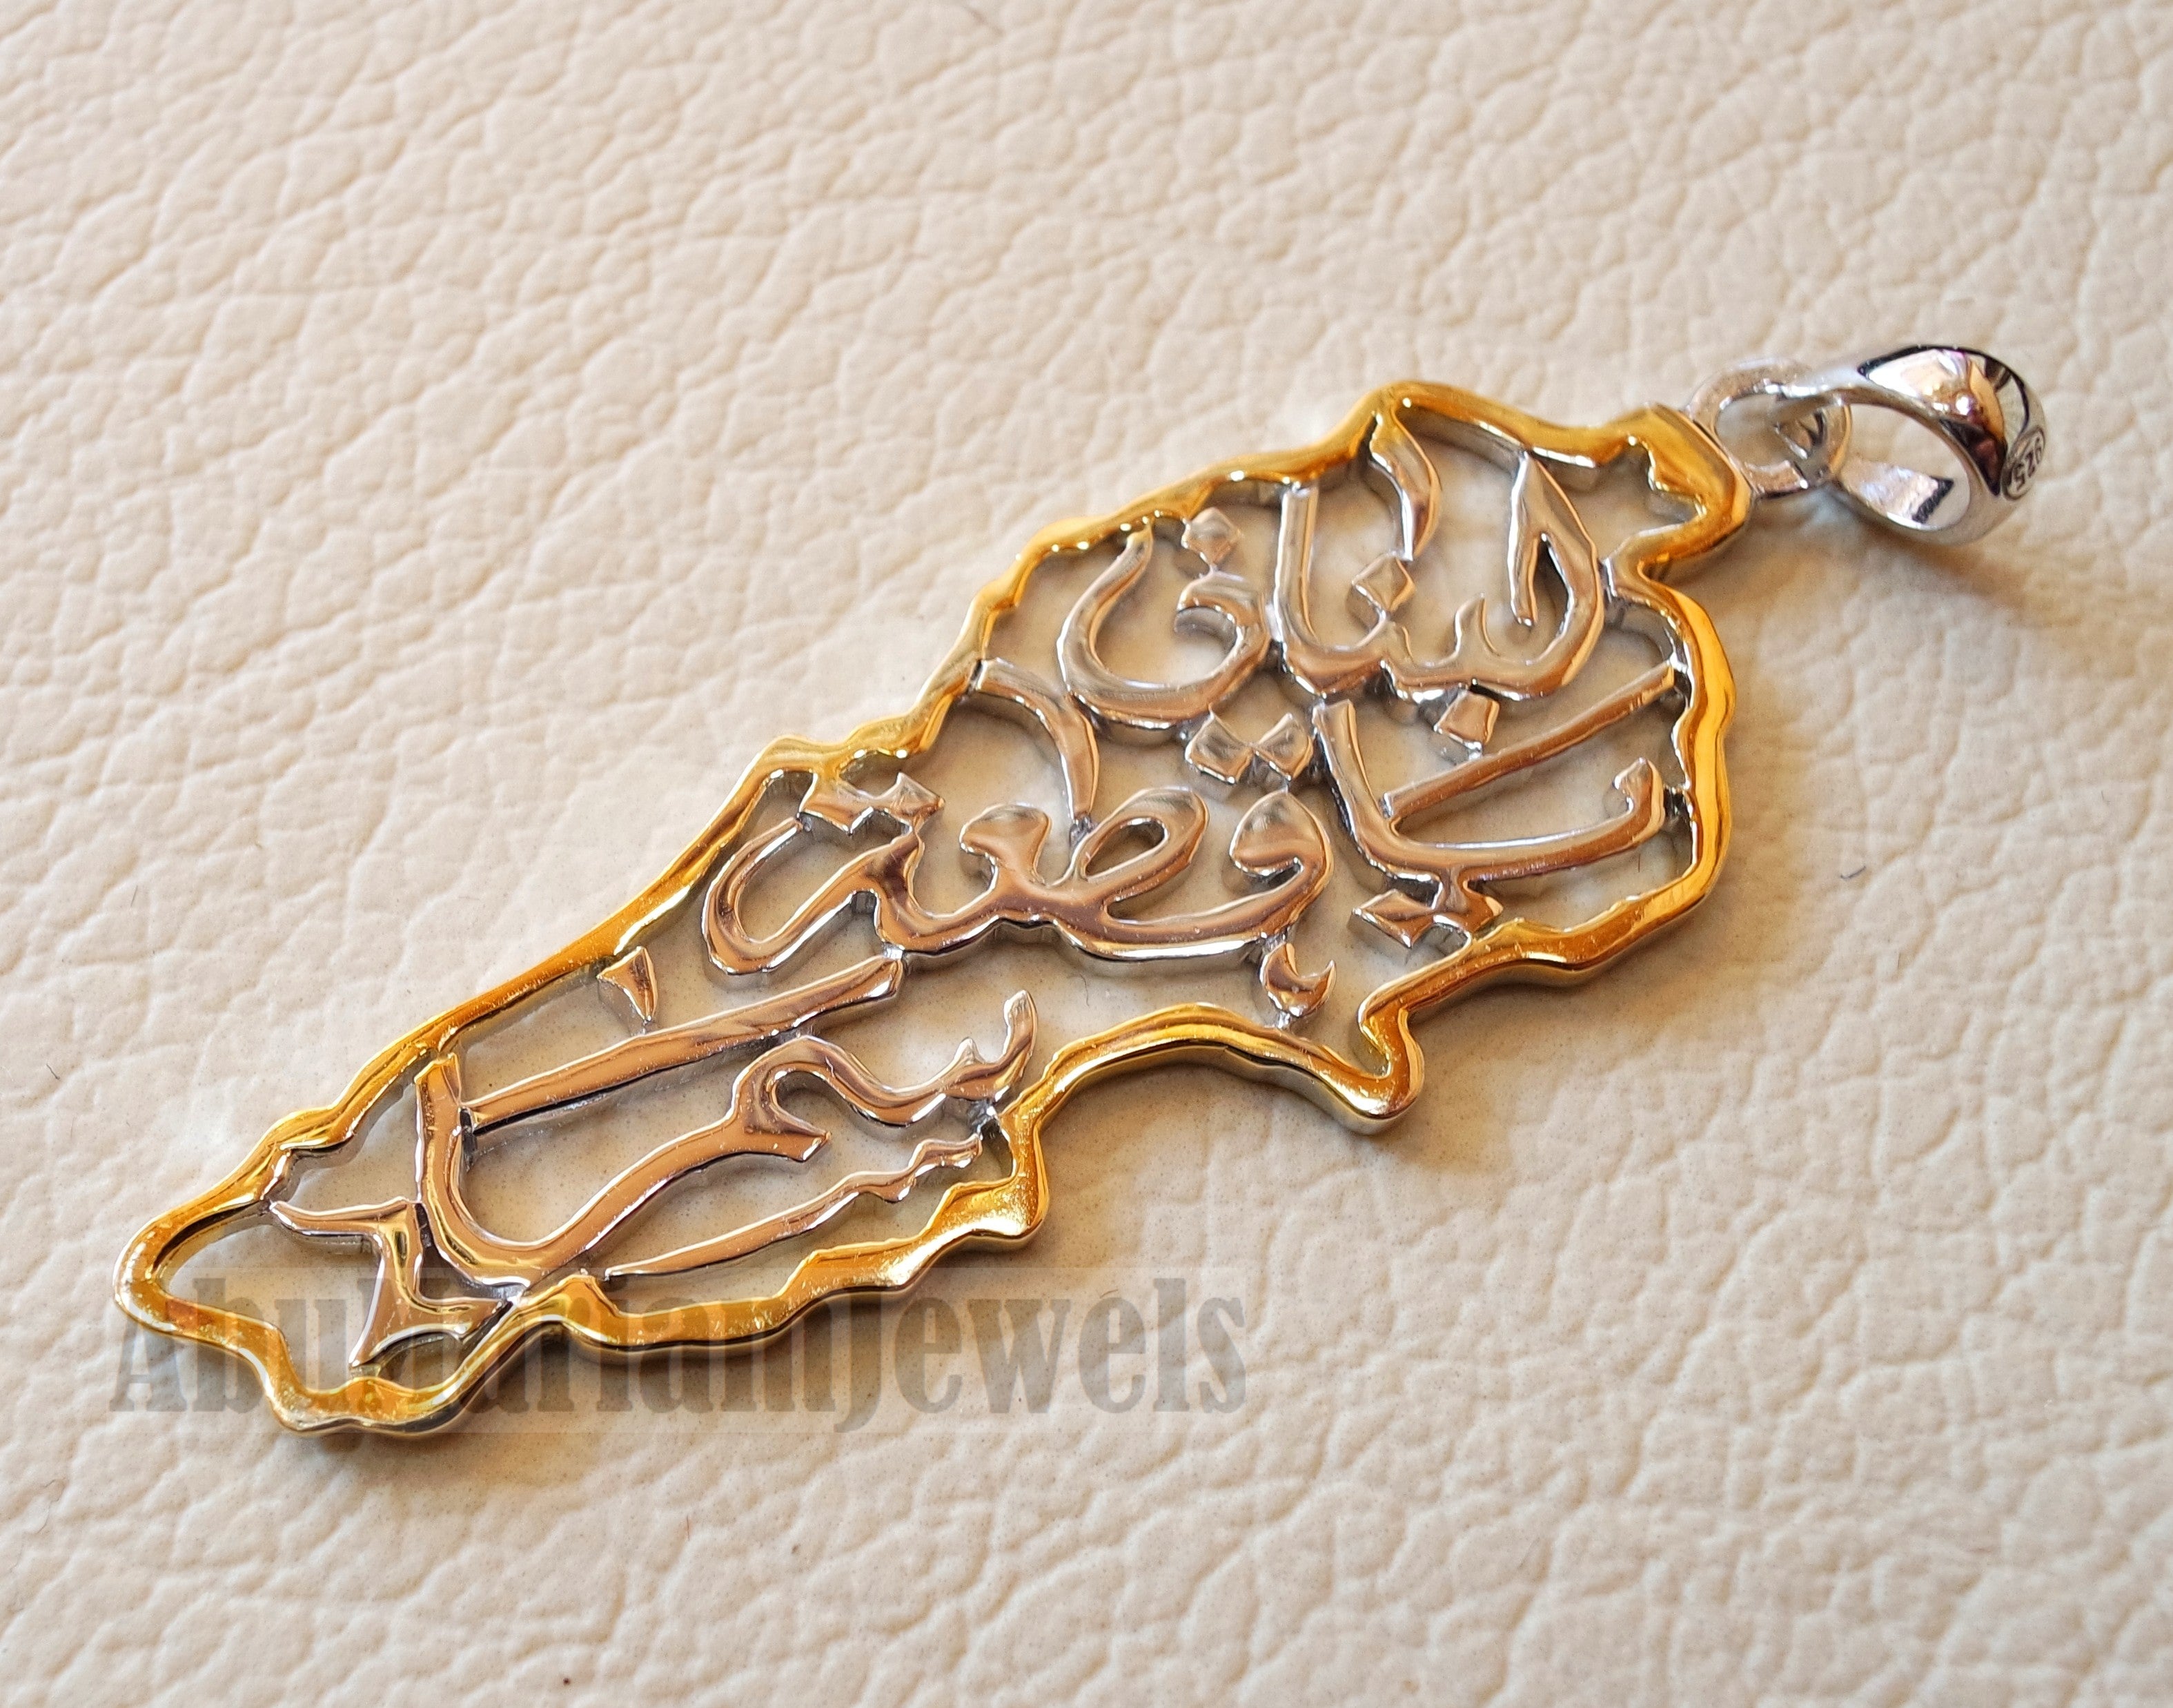 Lebanon map pendant with famous calligraphy sterling silver 925 high quality 14k gold plating jewelry arabic fast shipping خريطة لبنان